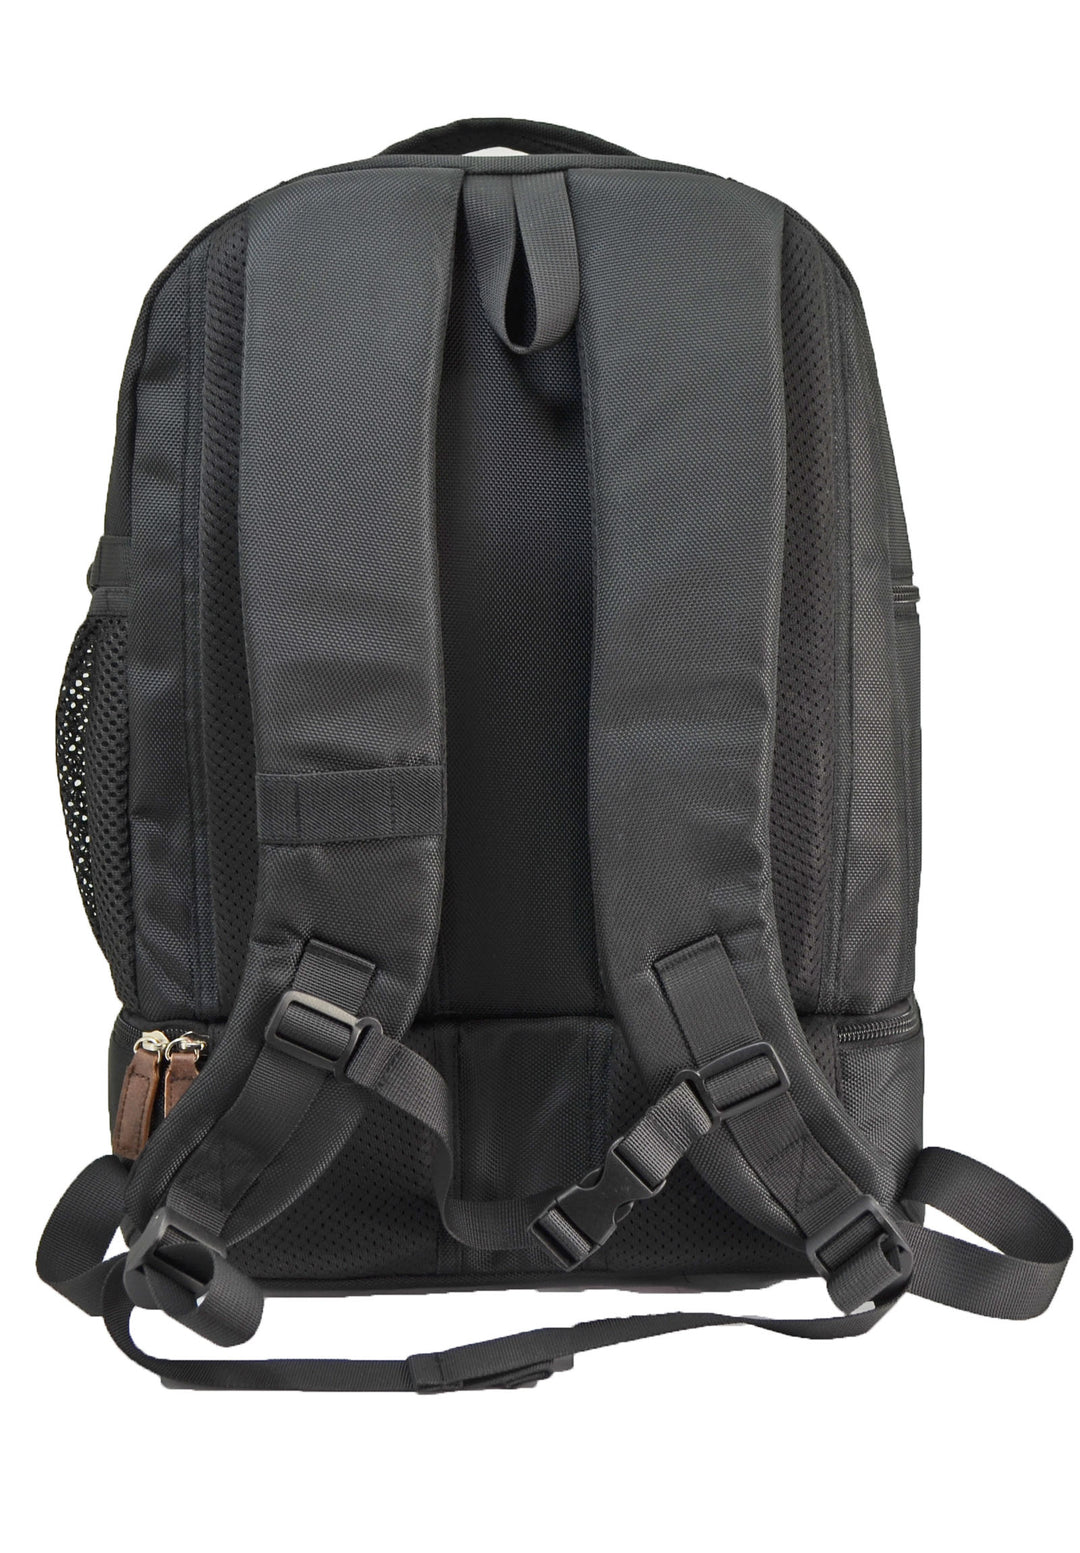 Save the Ocean Sustainable Black Backpack